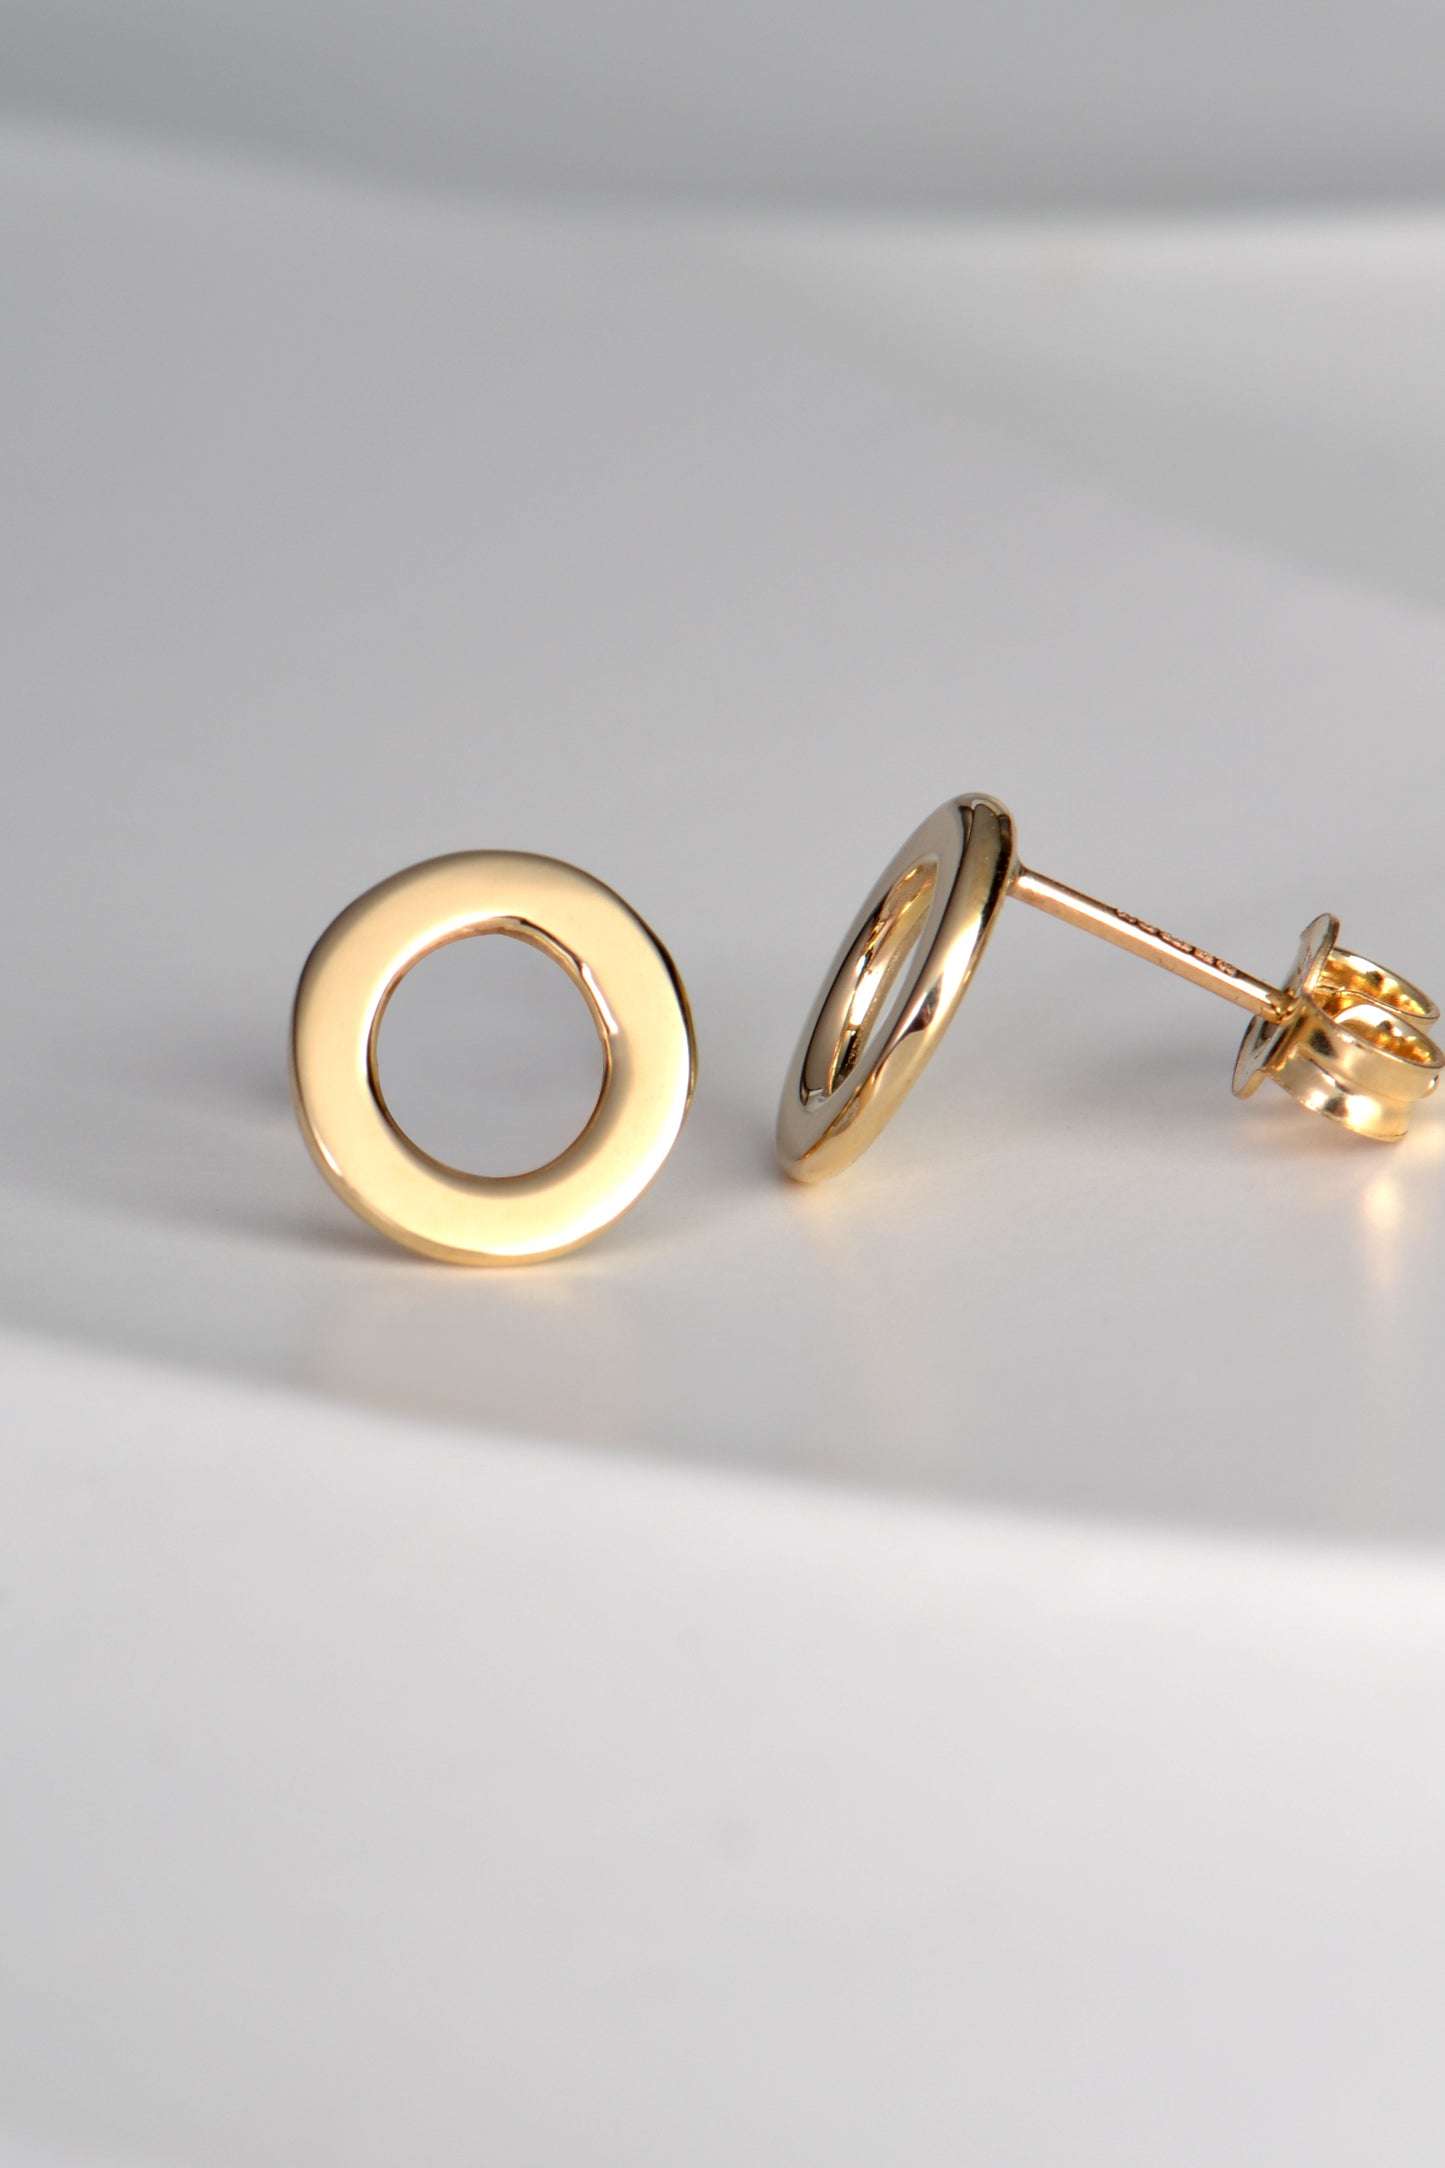 real gold round earrings with the earring post at the top of the ear